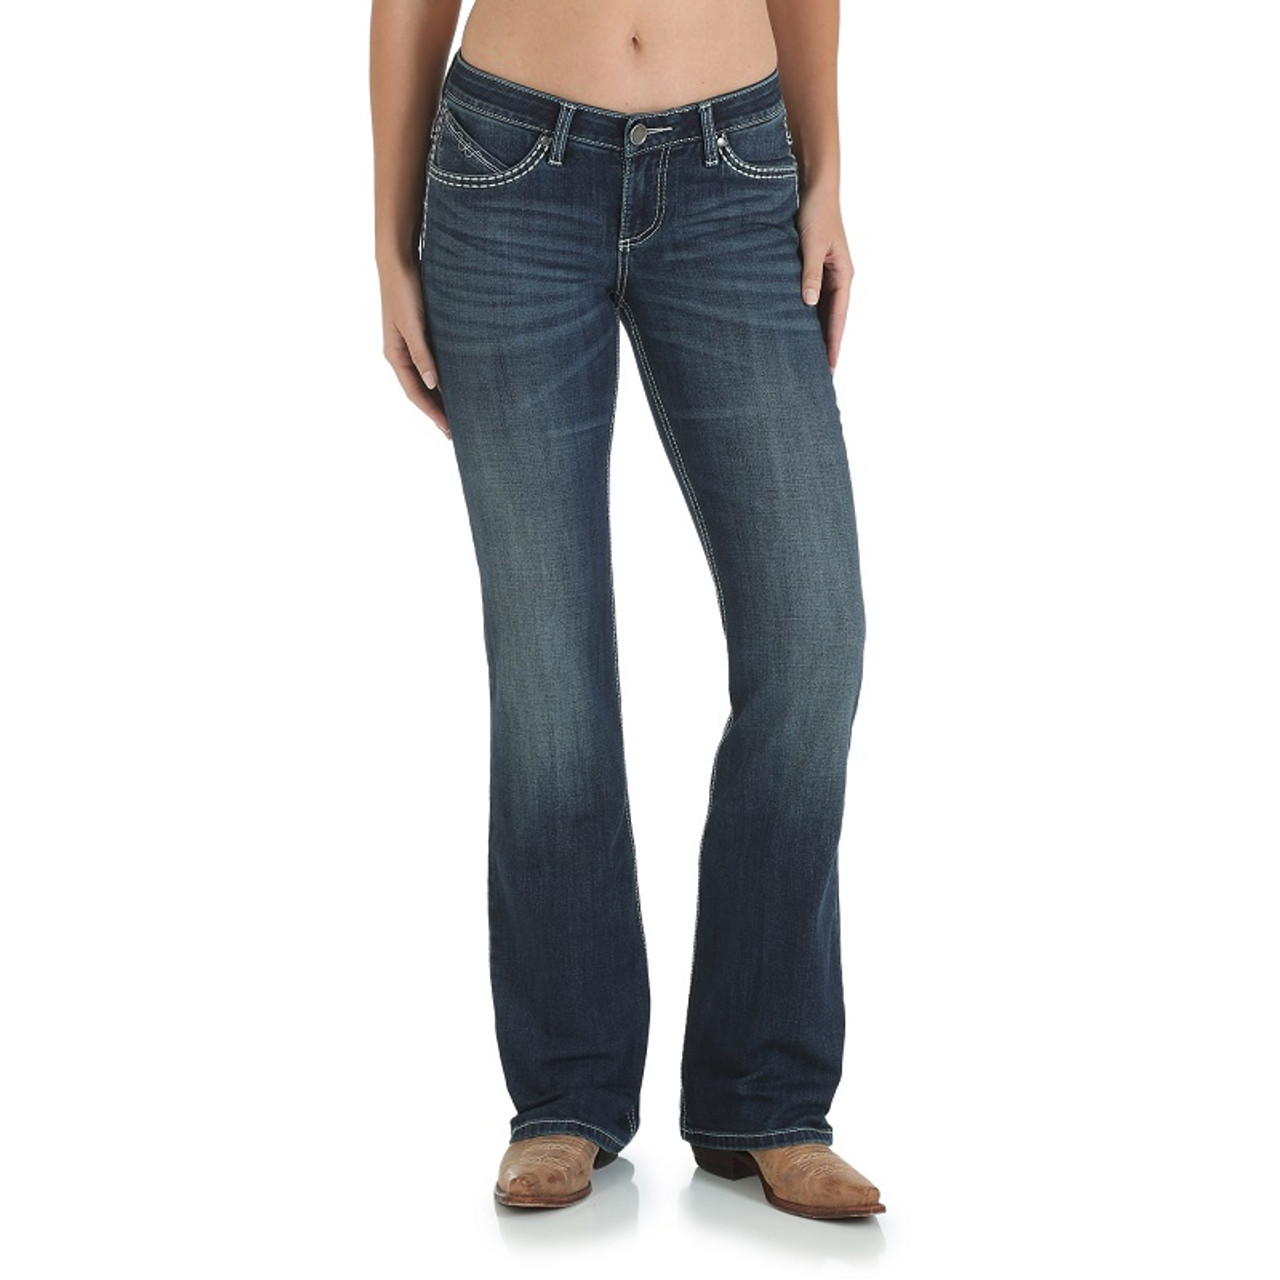 Wrangler Women's Shiloh Ultimate Riding® Jeans - Talk of the Town